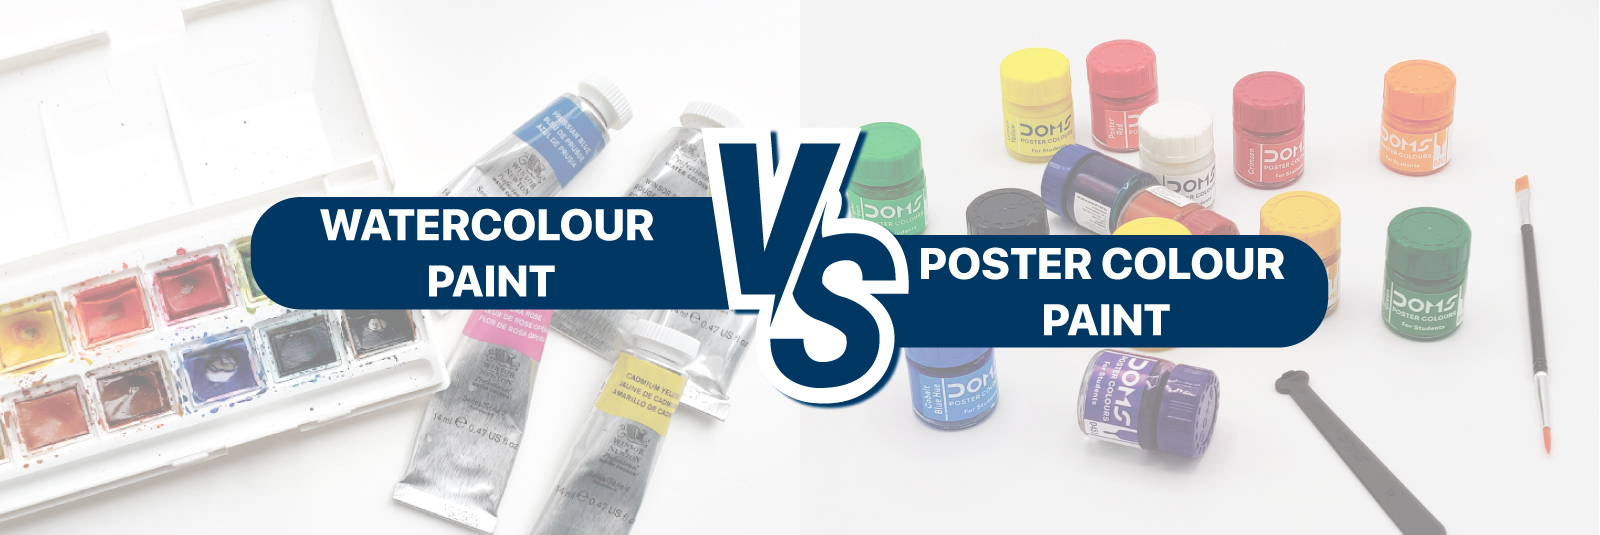 What is the difference between Watercolour Paint and Poster Colour Paint